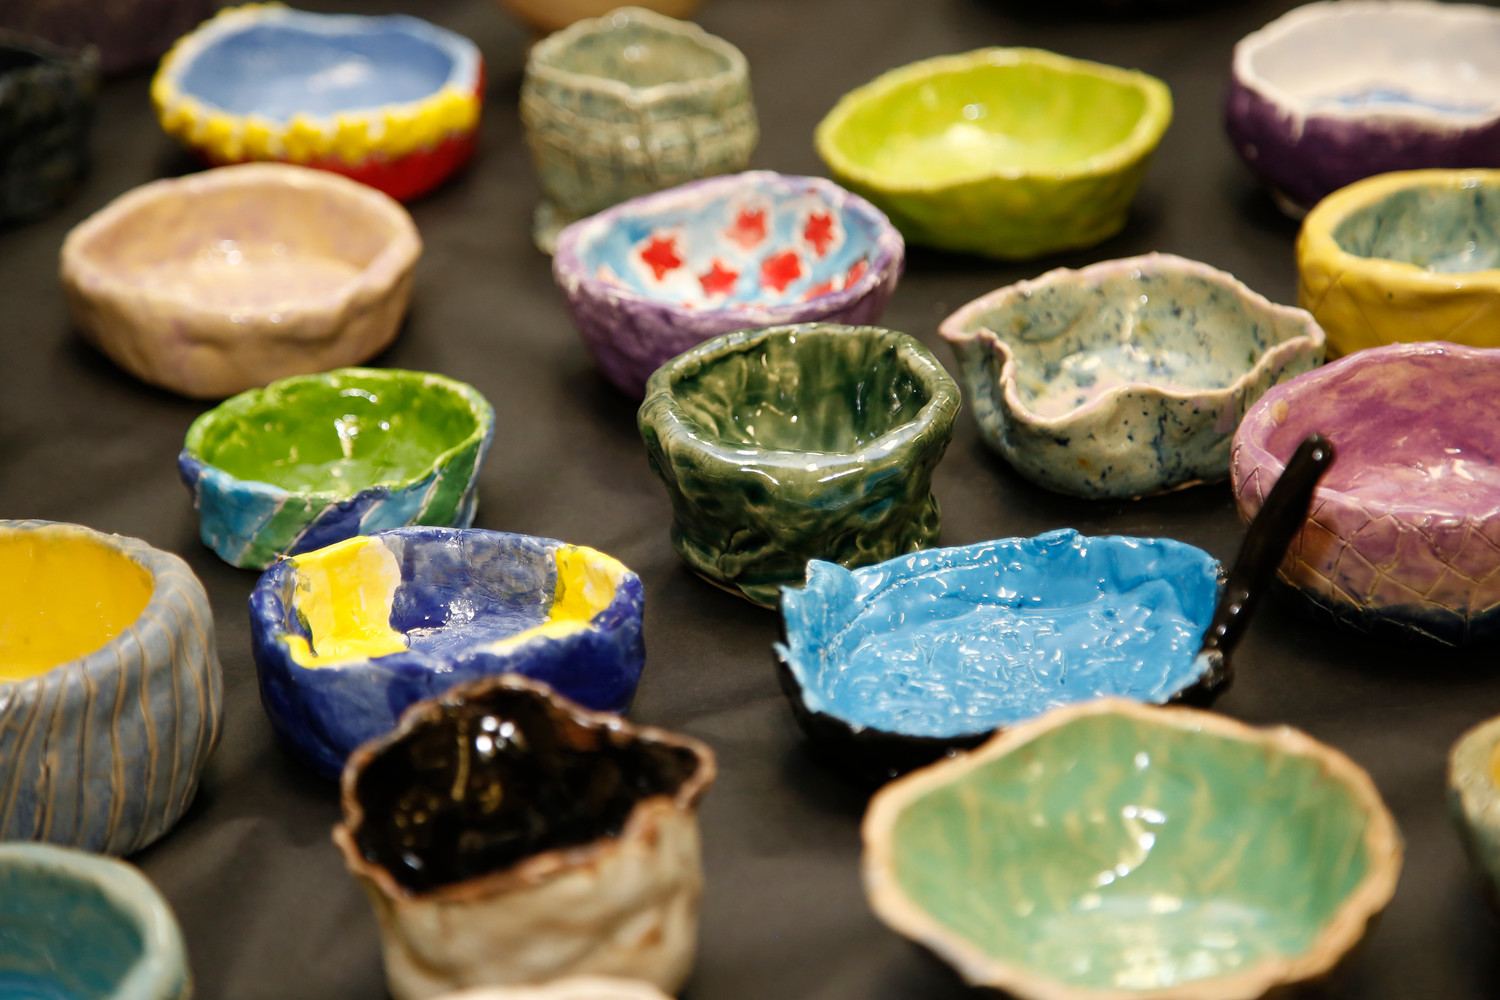 Students, staff and community members made ceramic bowls that were sold at the dinner.